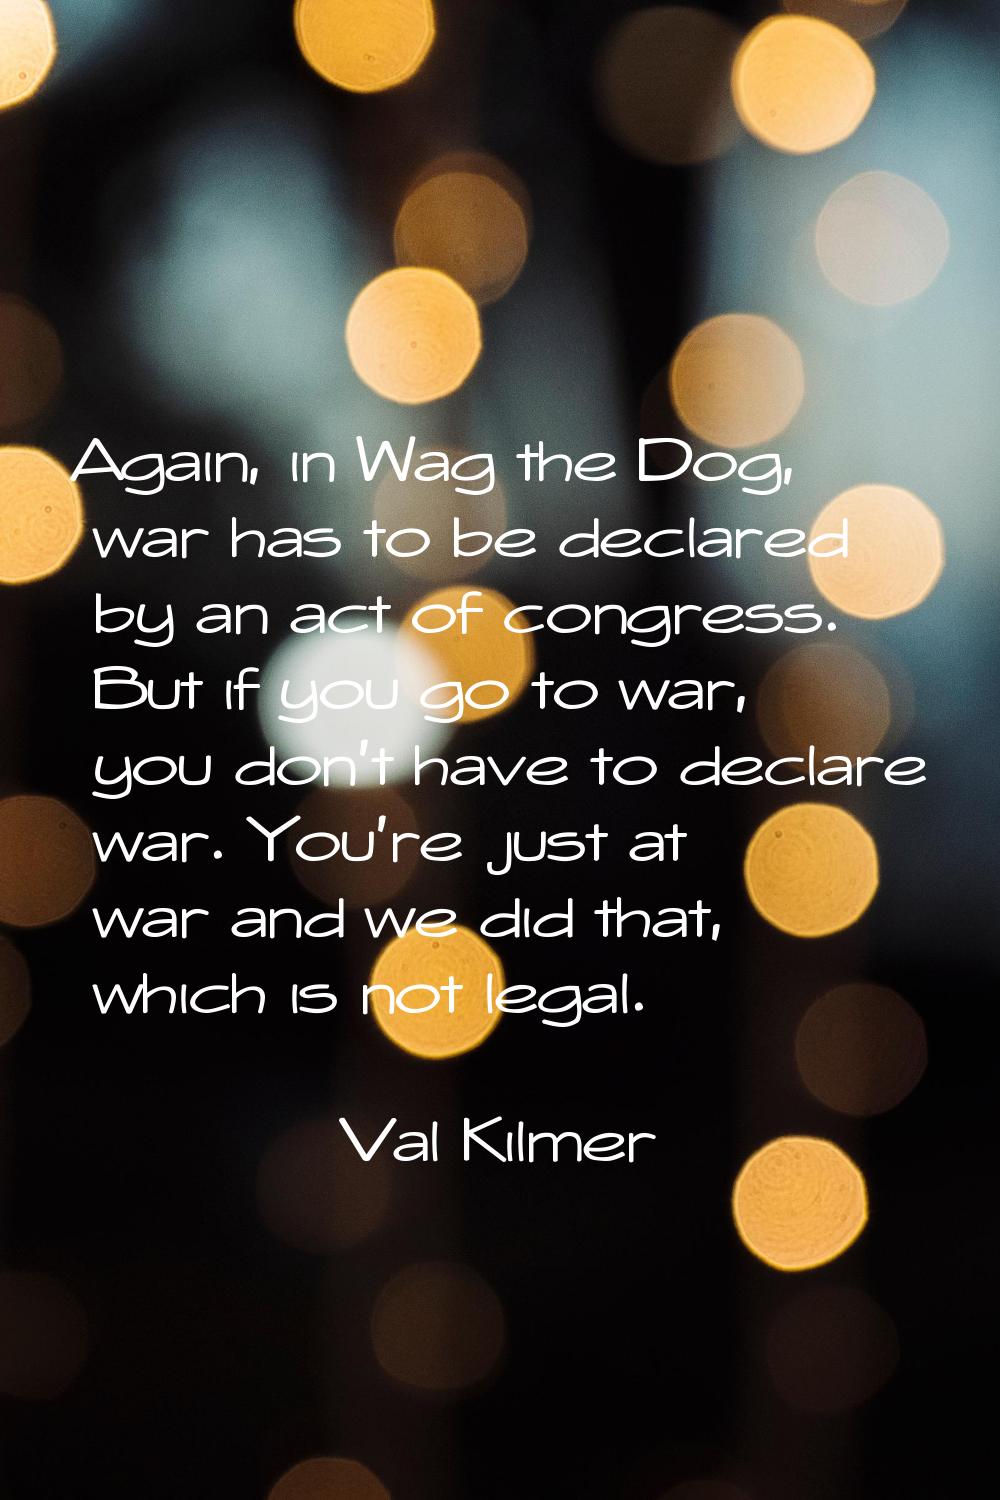 Again, in Wag the Dog, war has to be declared by an act of congress. But if you go to war, you don'